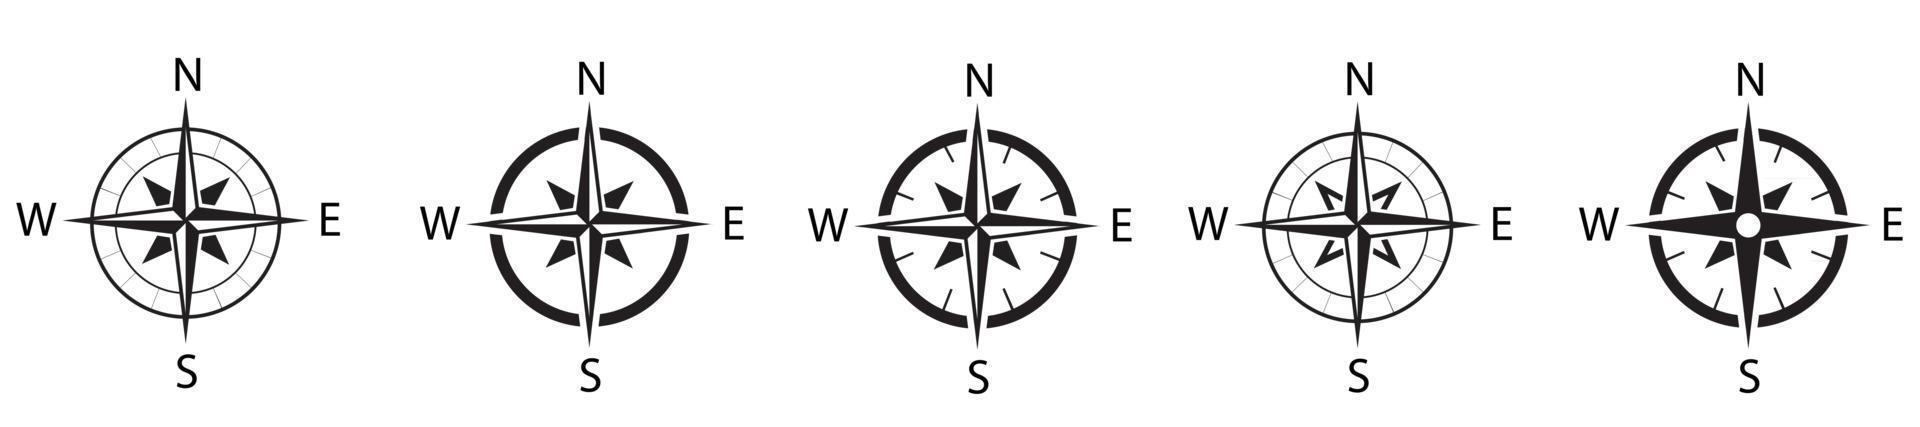 Compass simple icon set. Compass symbol set. Wind rose icon. Vector